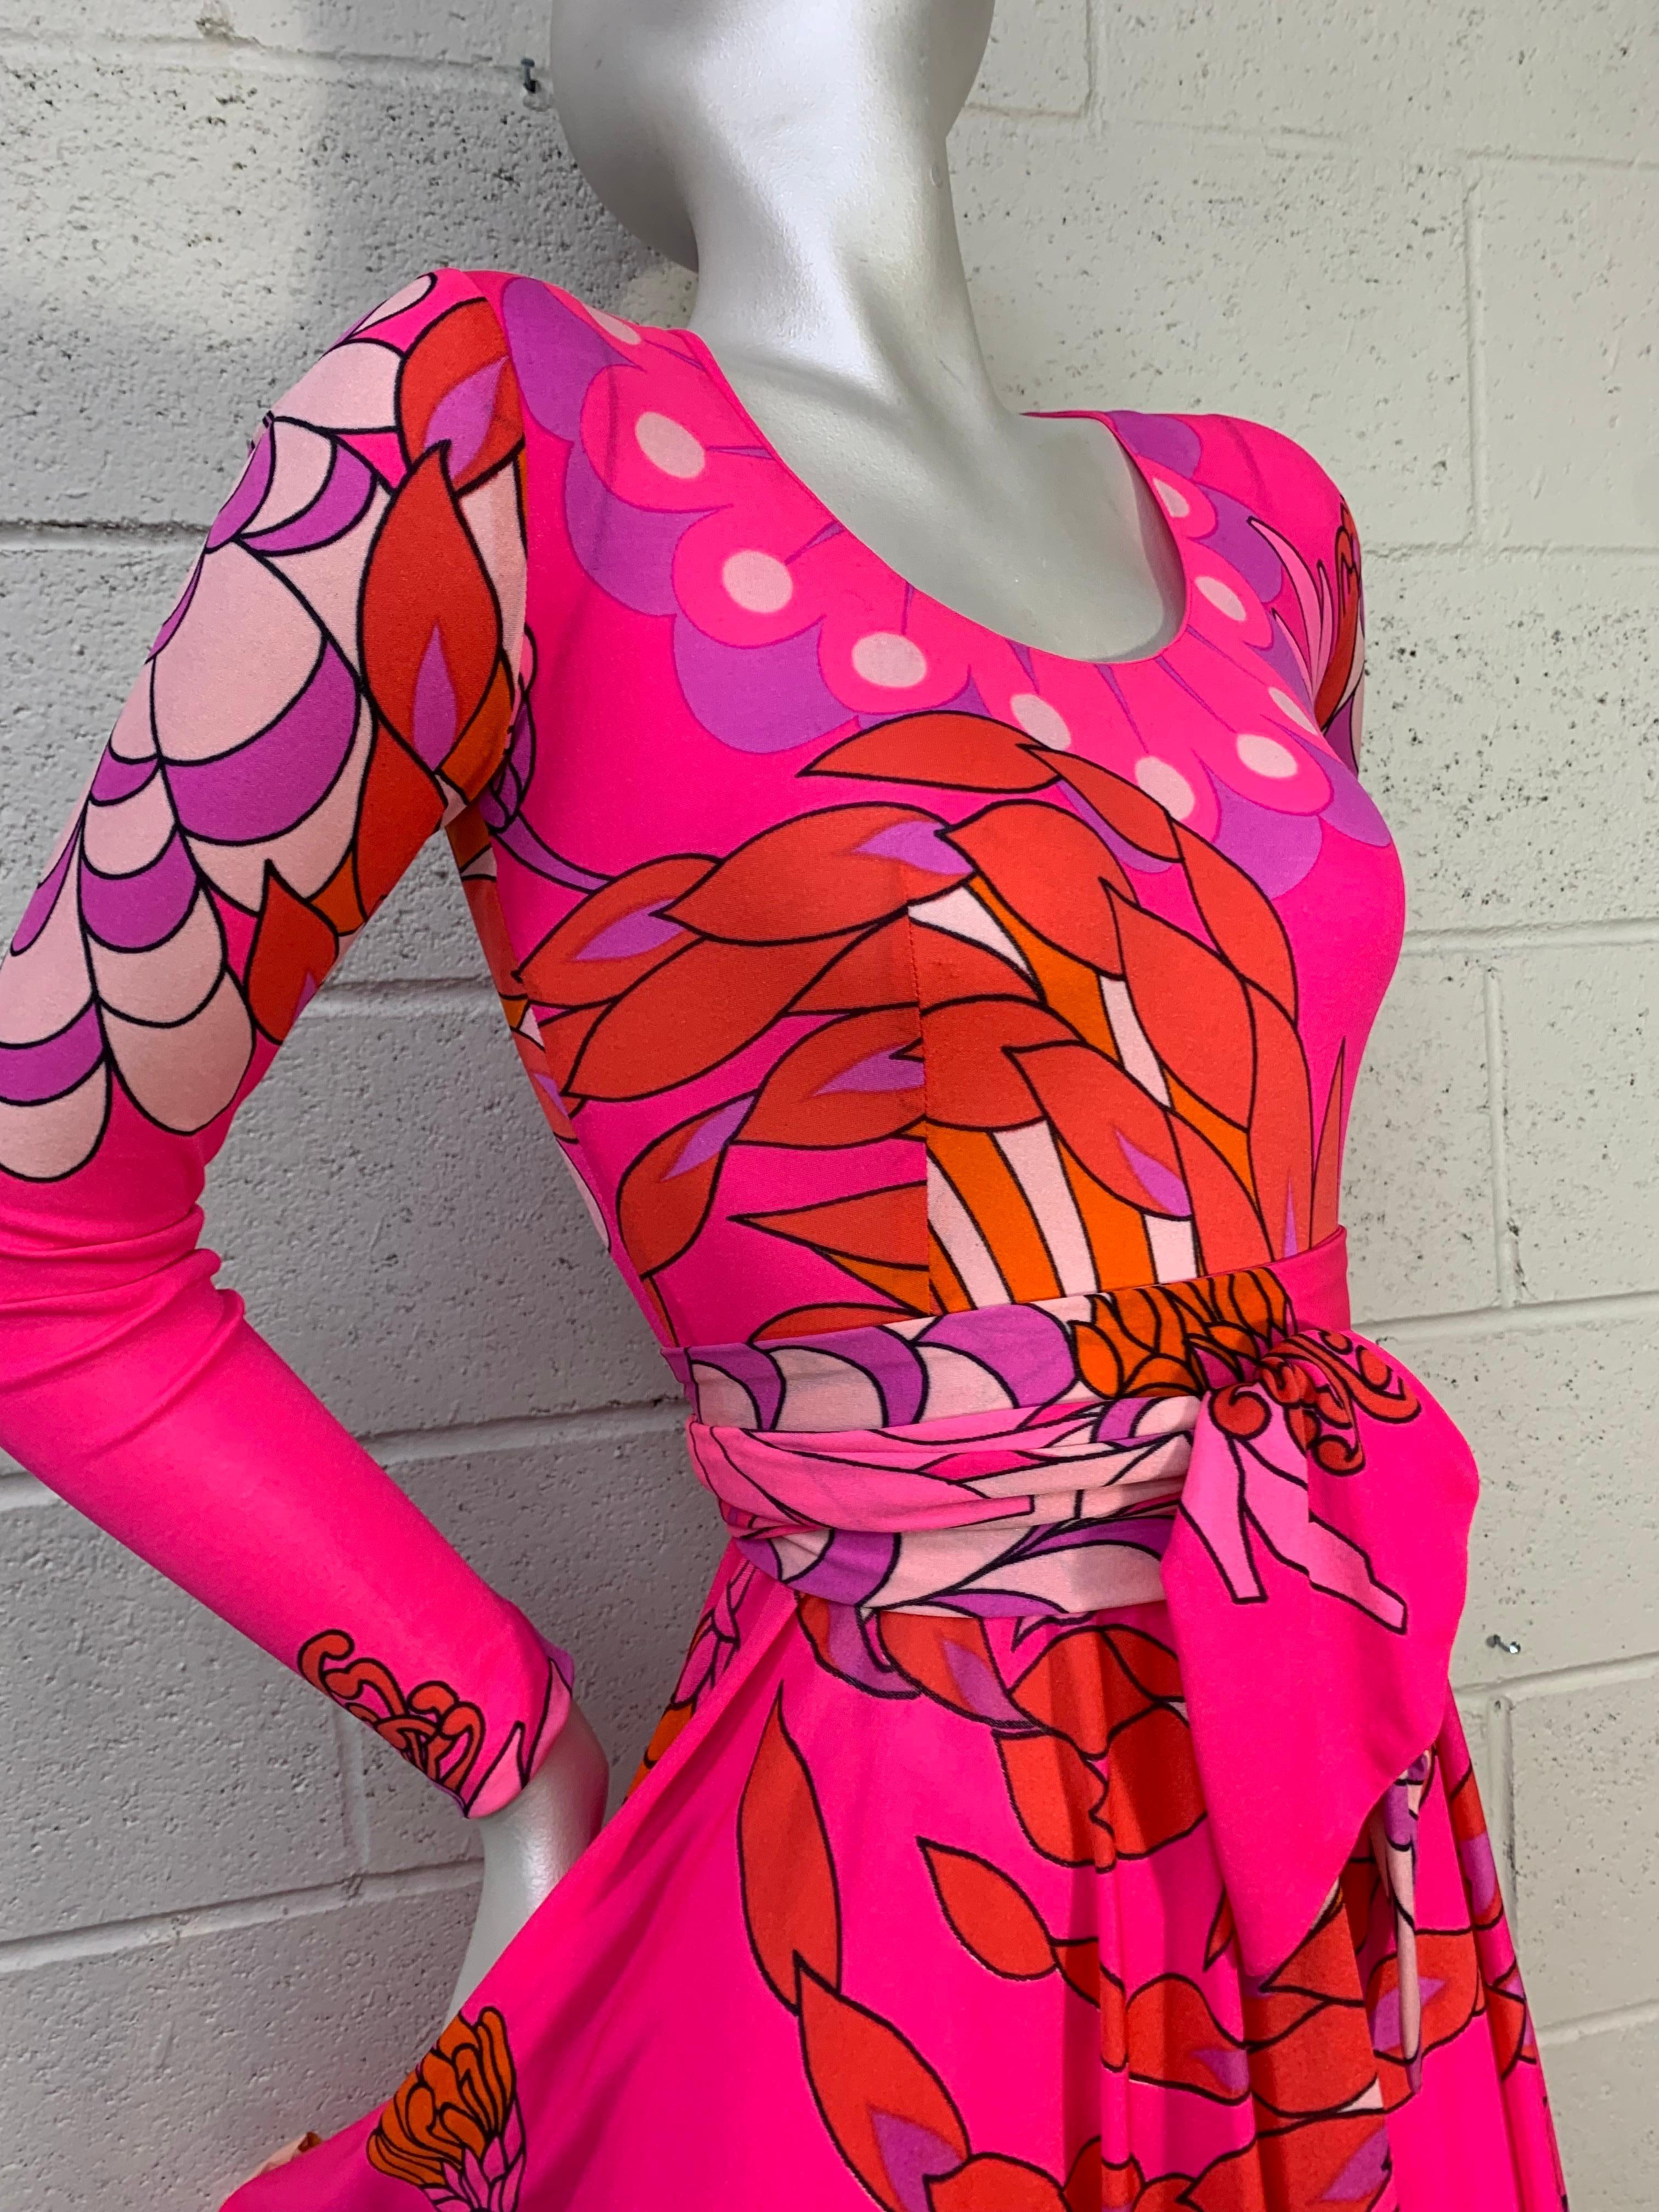 1970s La Mendola Fluorescent Pink Mod Floral Print Silk Jersey Day Dress w Flair:  A wild and vivacious classic La Mendola print in the brightest pink with red, orange and lavender compliments make this bold, tropical print perfect for a summer